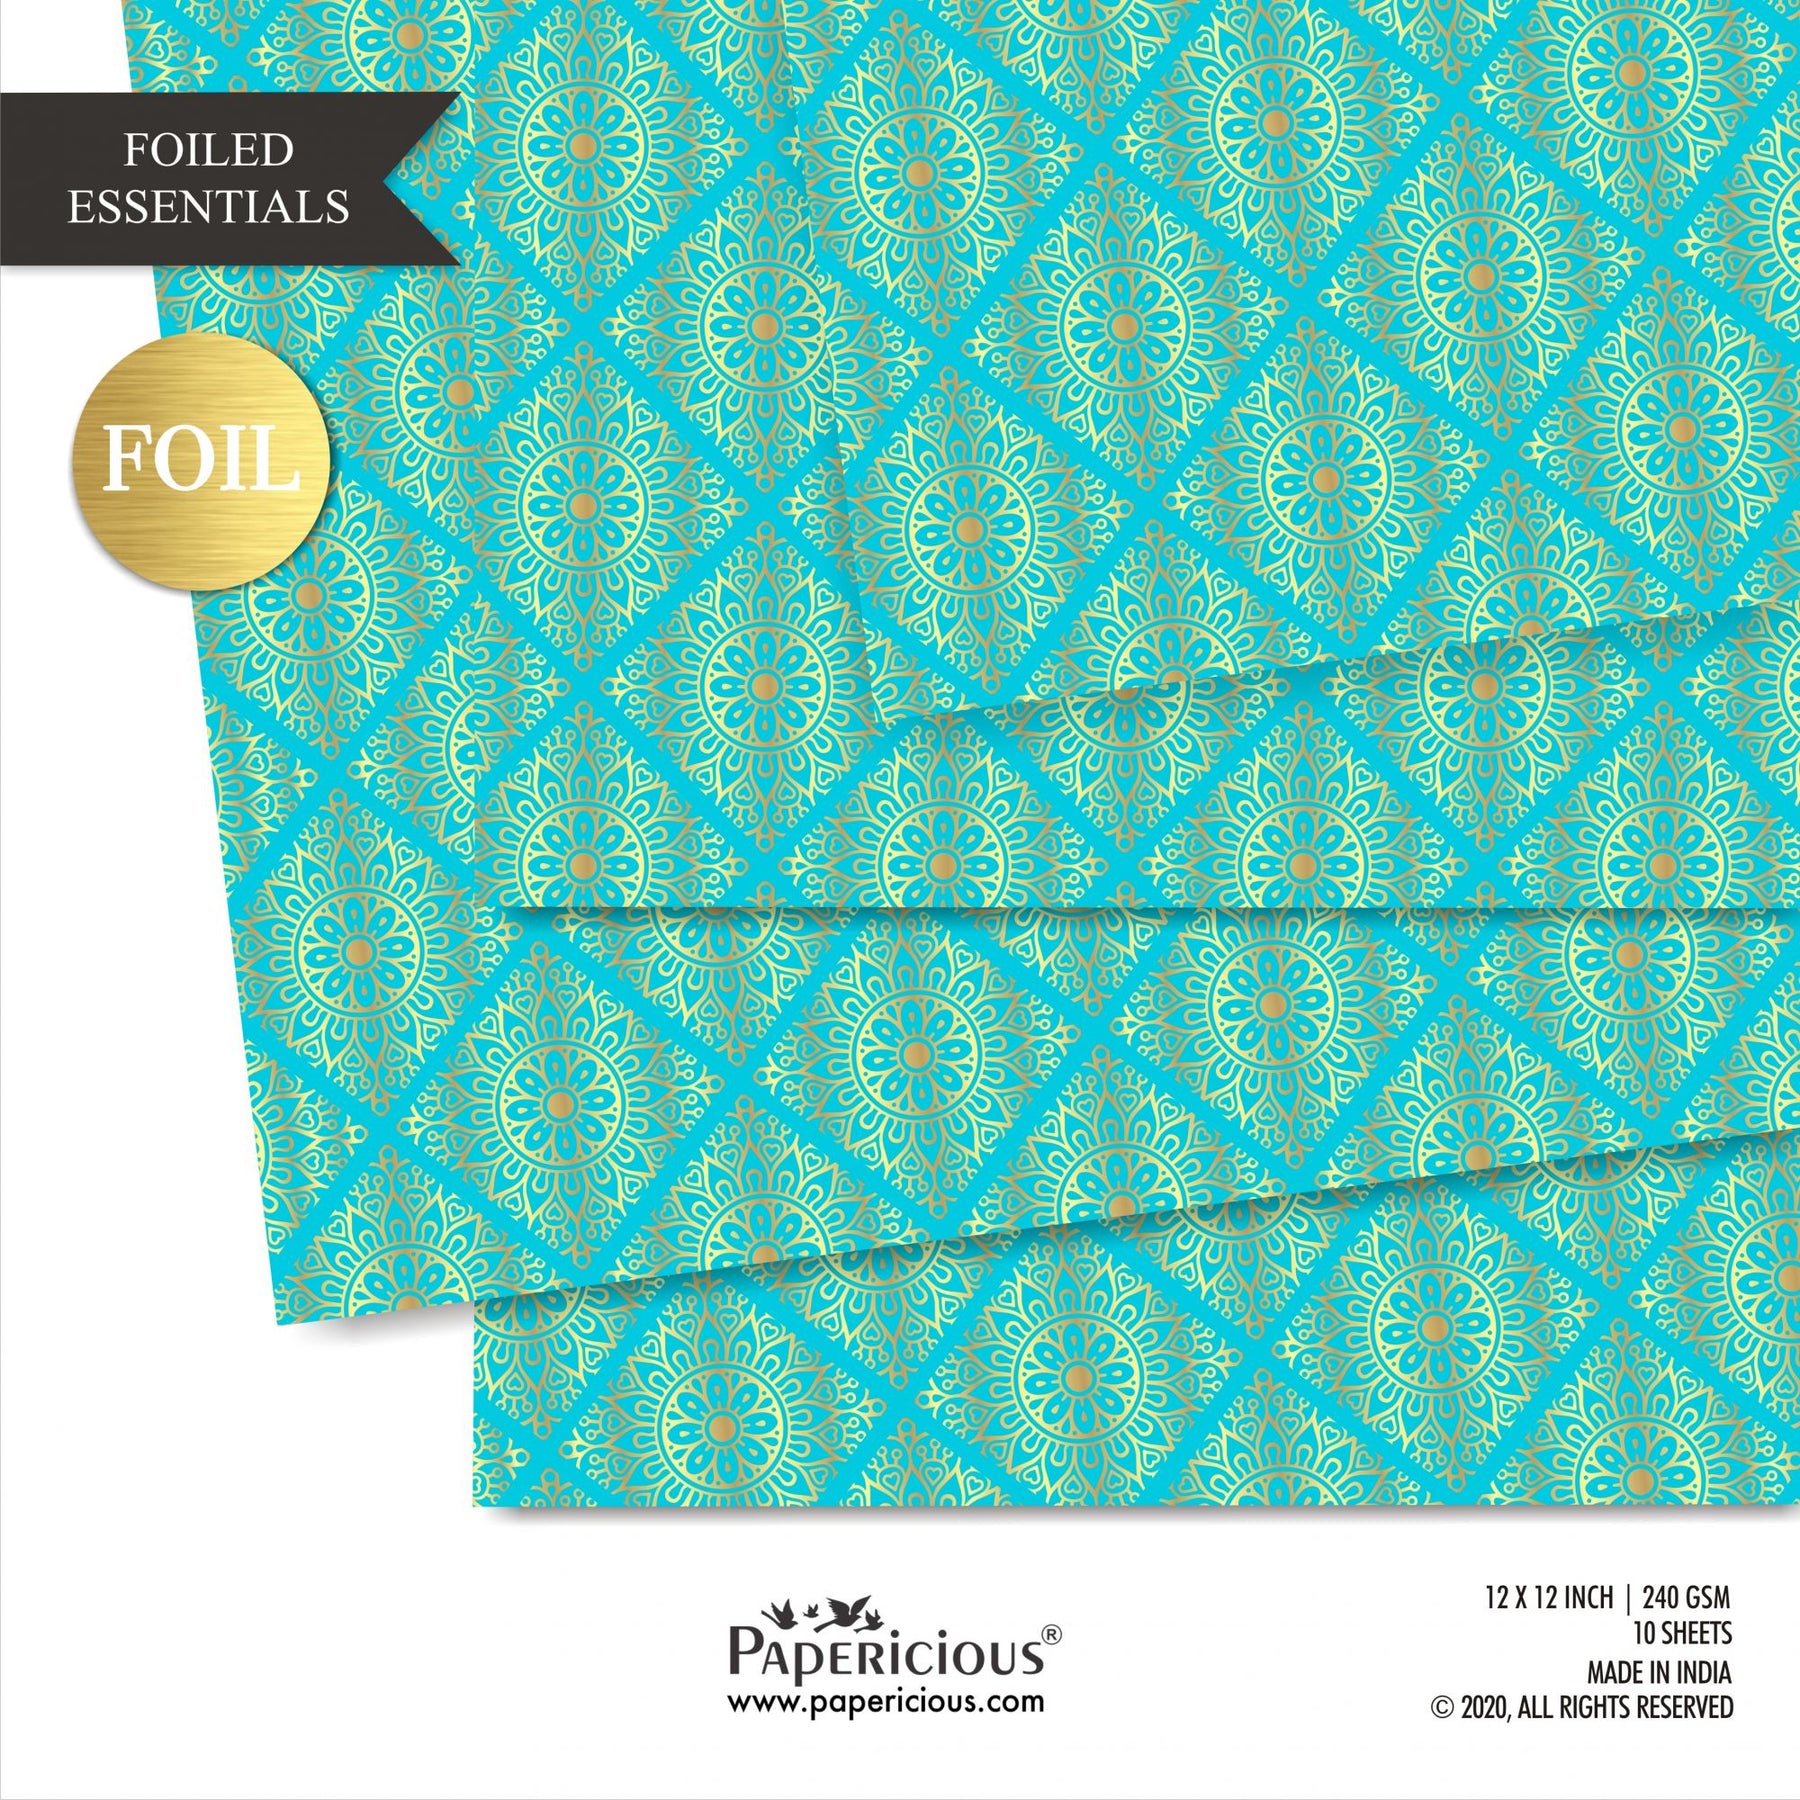 Papericious - Golden Foiled Pattern Scrapbook Papers 12x12 inch / 10 sheets / #12513